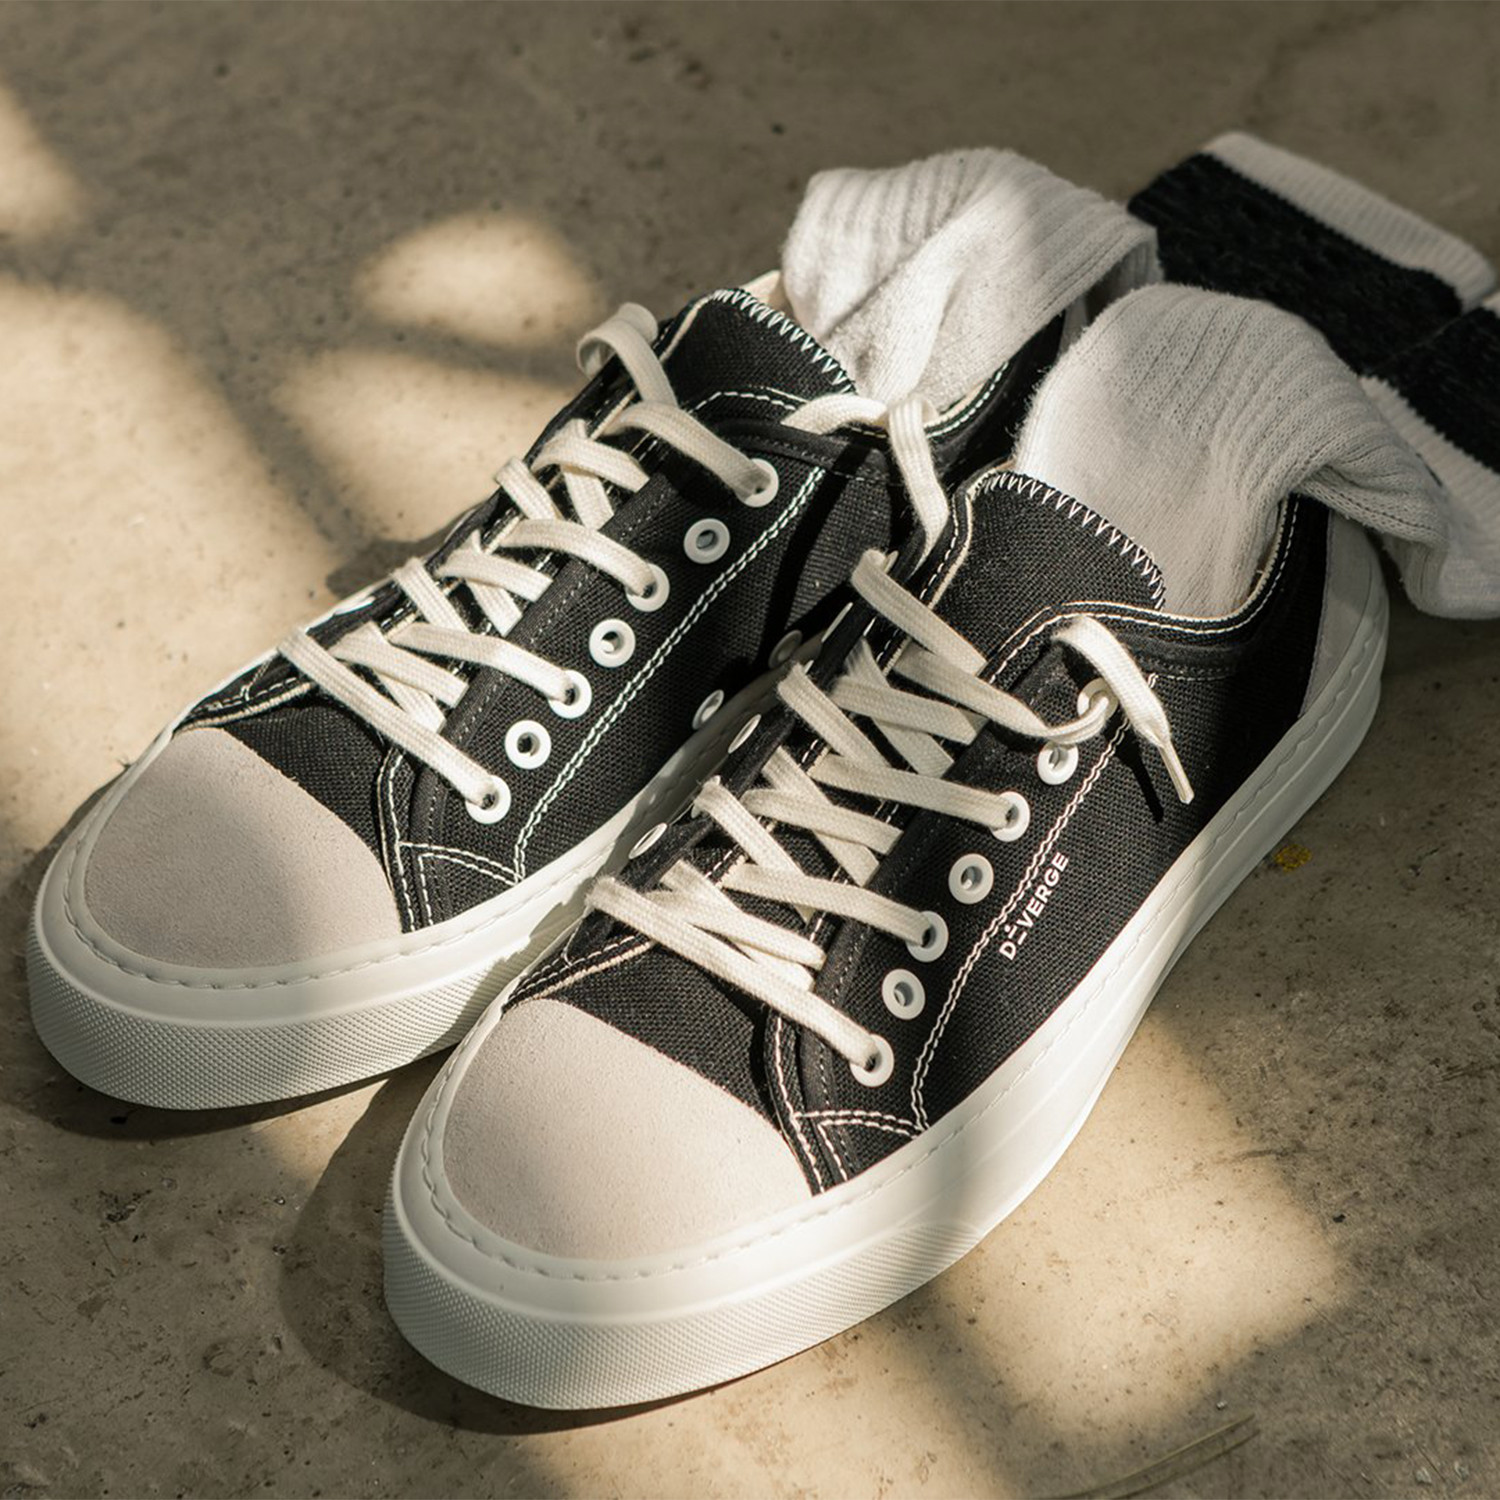 Full Color Canvas Sneakers V2 // Black (US: 10.5) - Diverge Sneakers ...